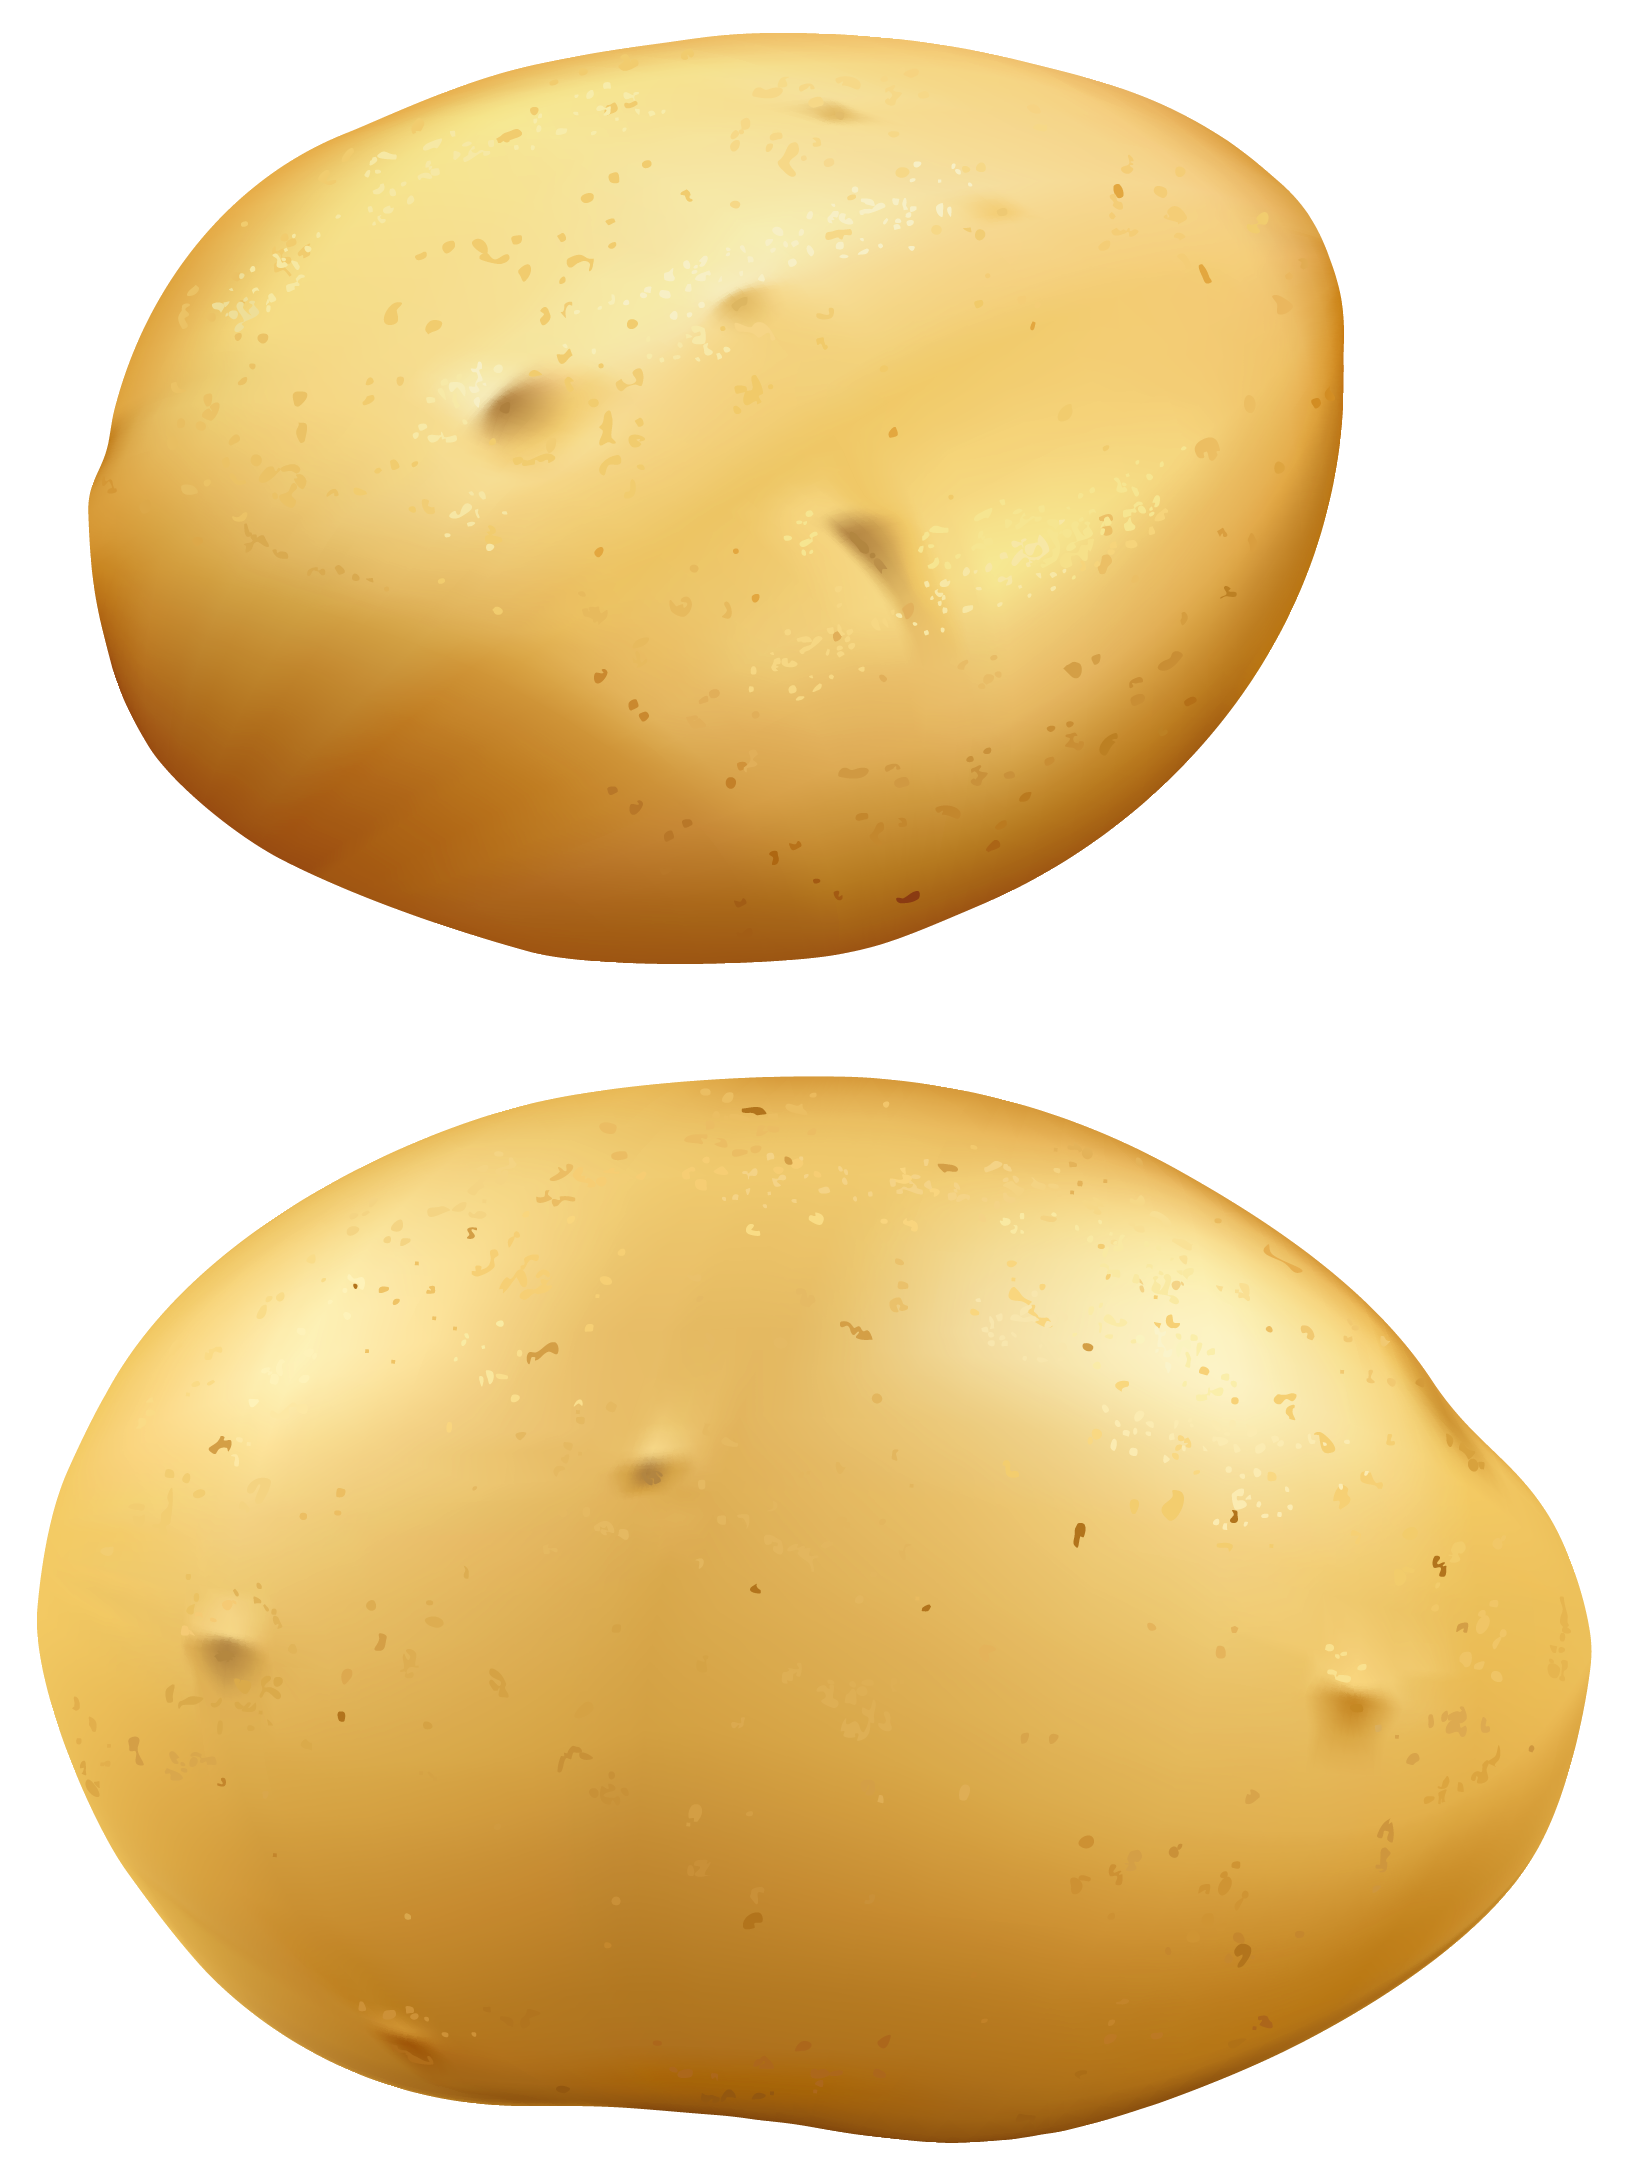 Potatoes png gallery yopriceville. Vegetables clipart potato